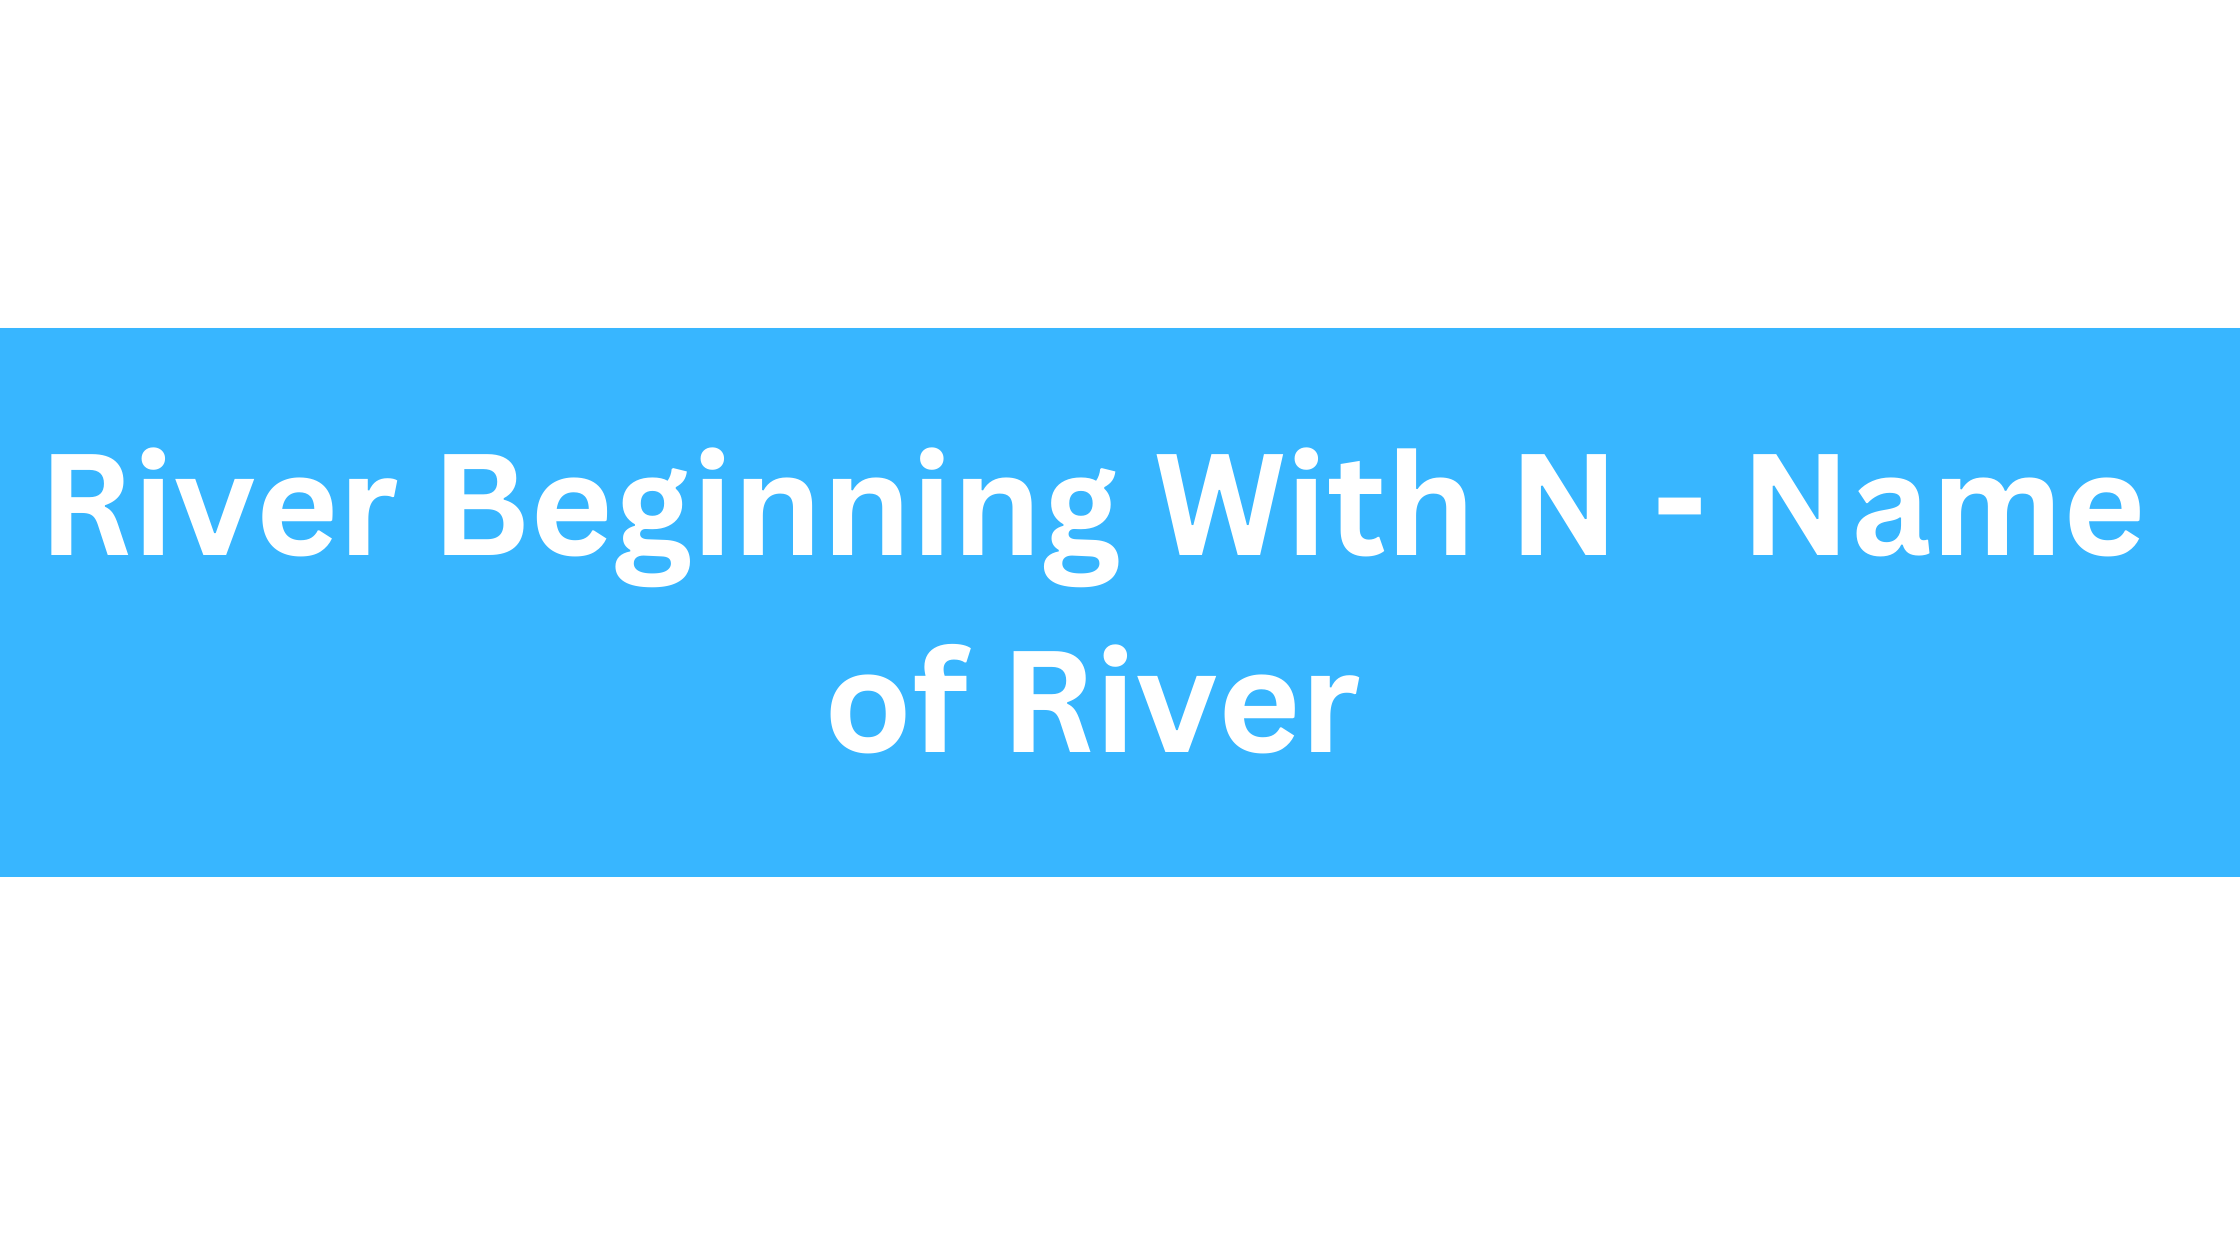 River Beginning With N